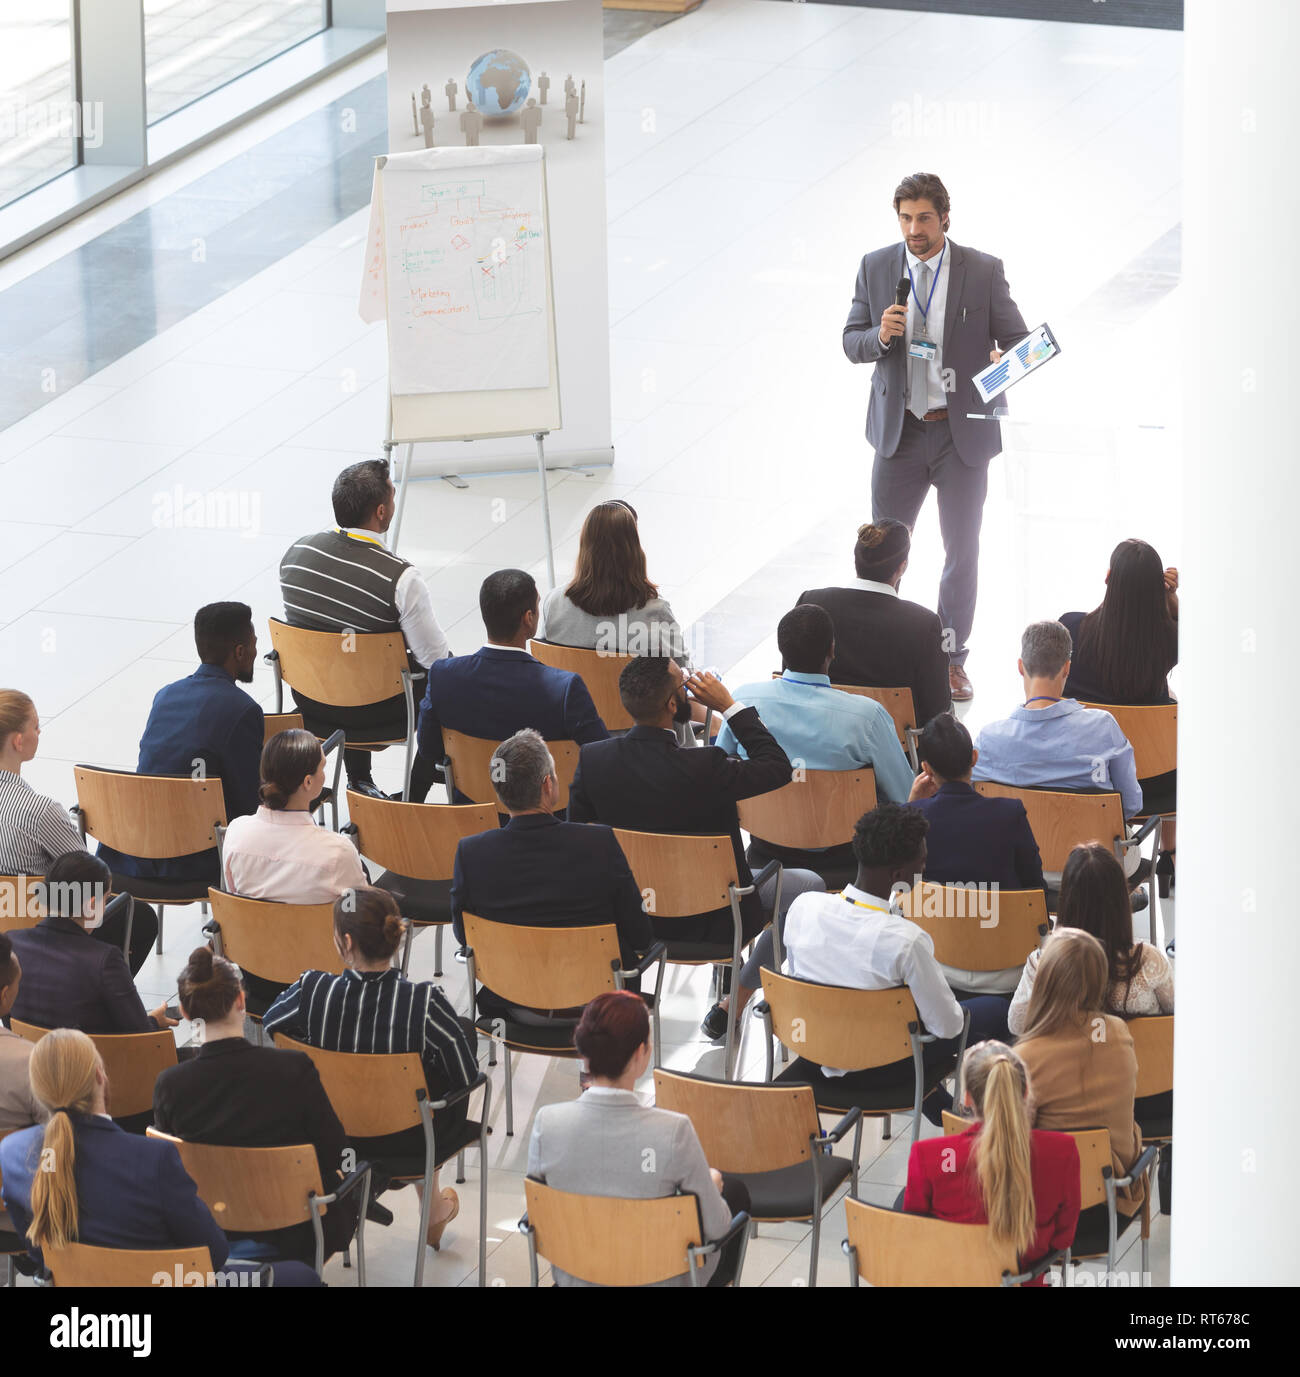 Businessman giving speech at business conference Stock Photo